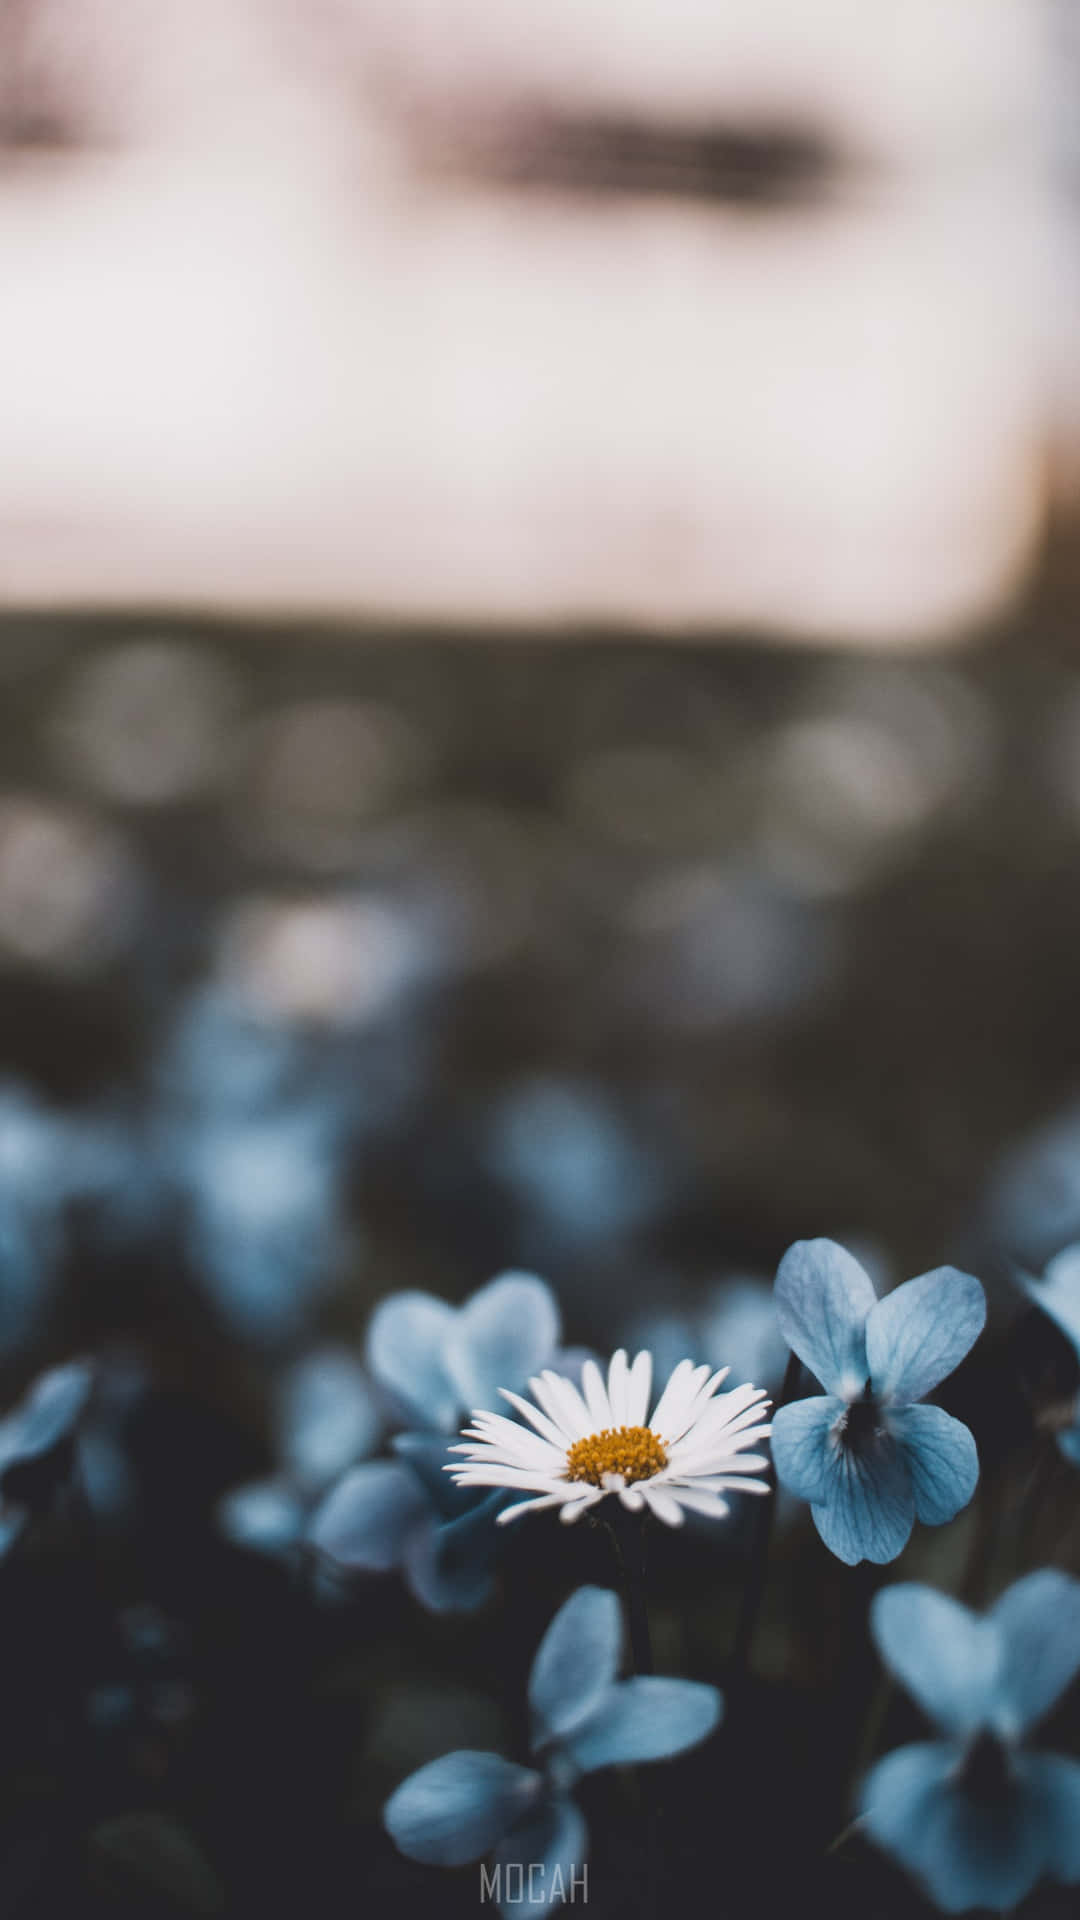 A Daisy Flower In The Middle Of A Field Wallpaper